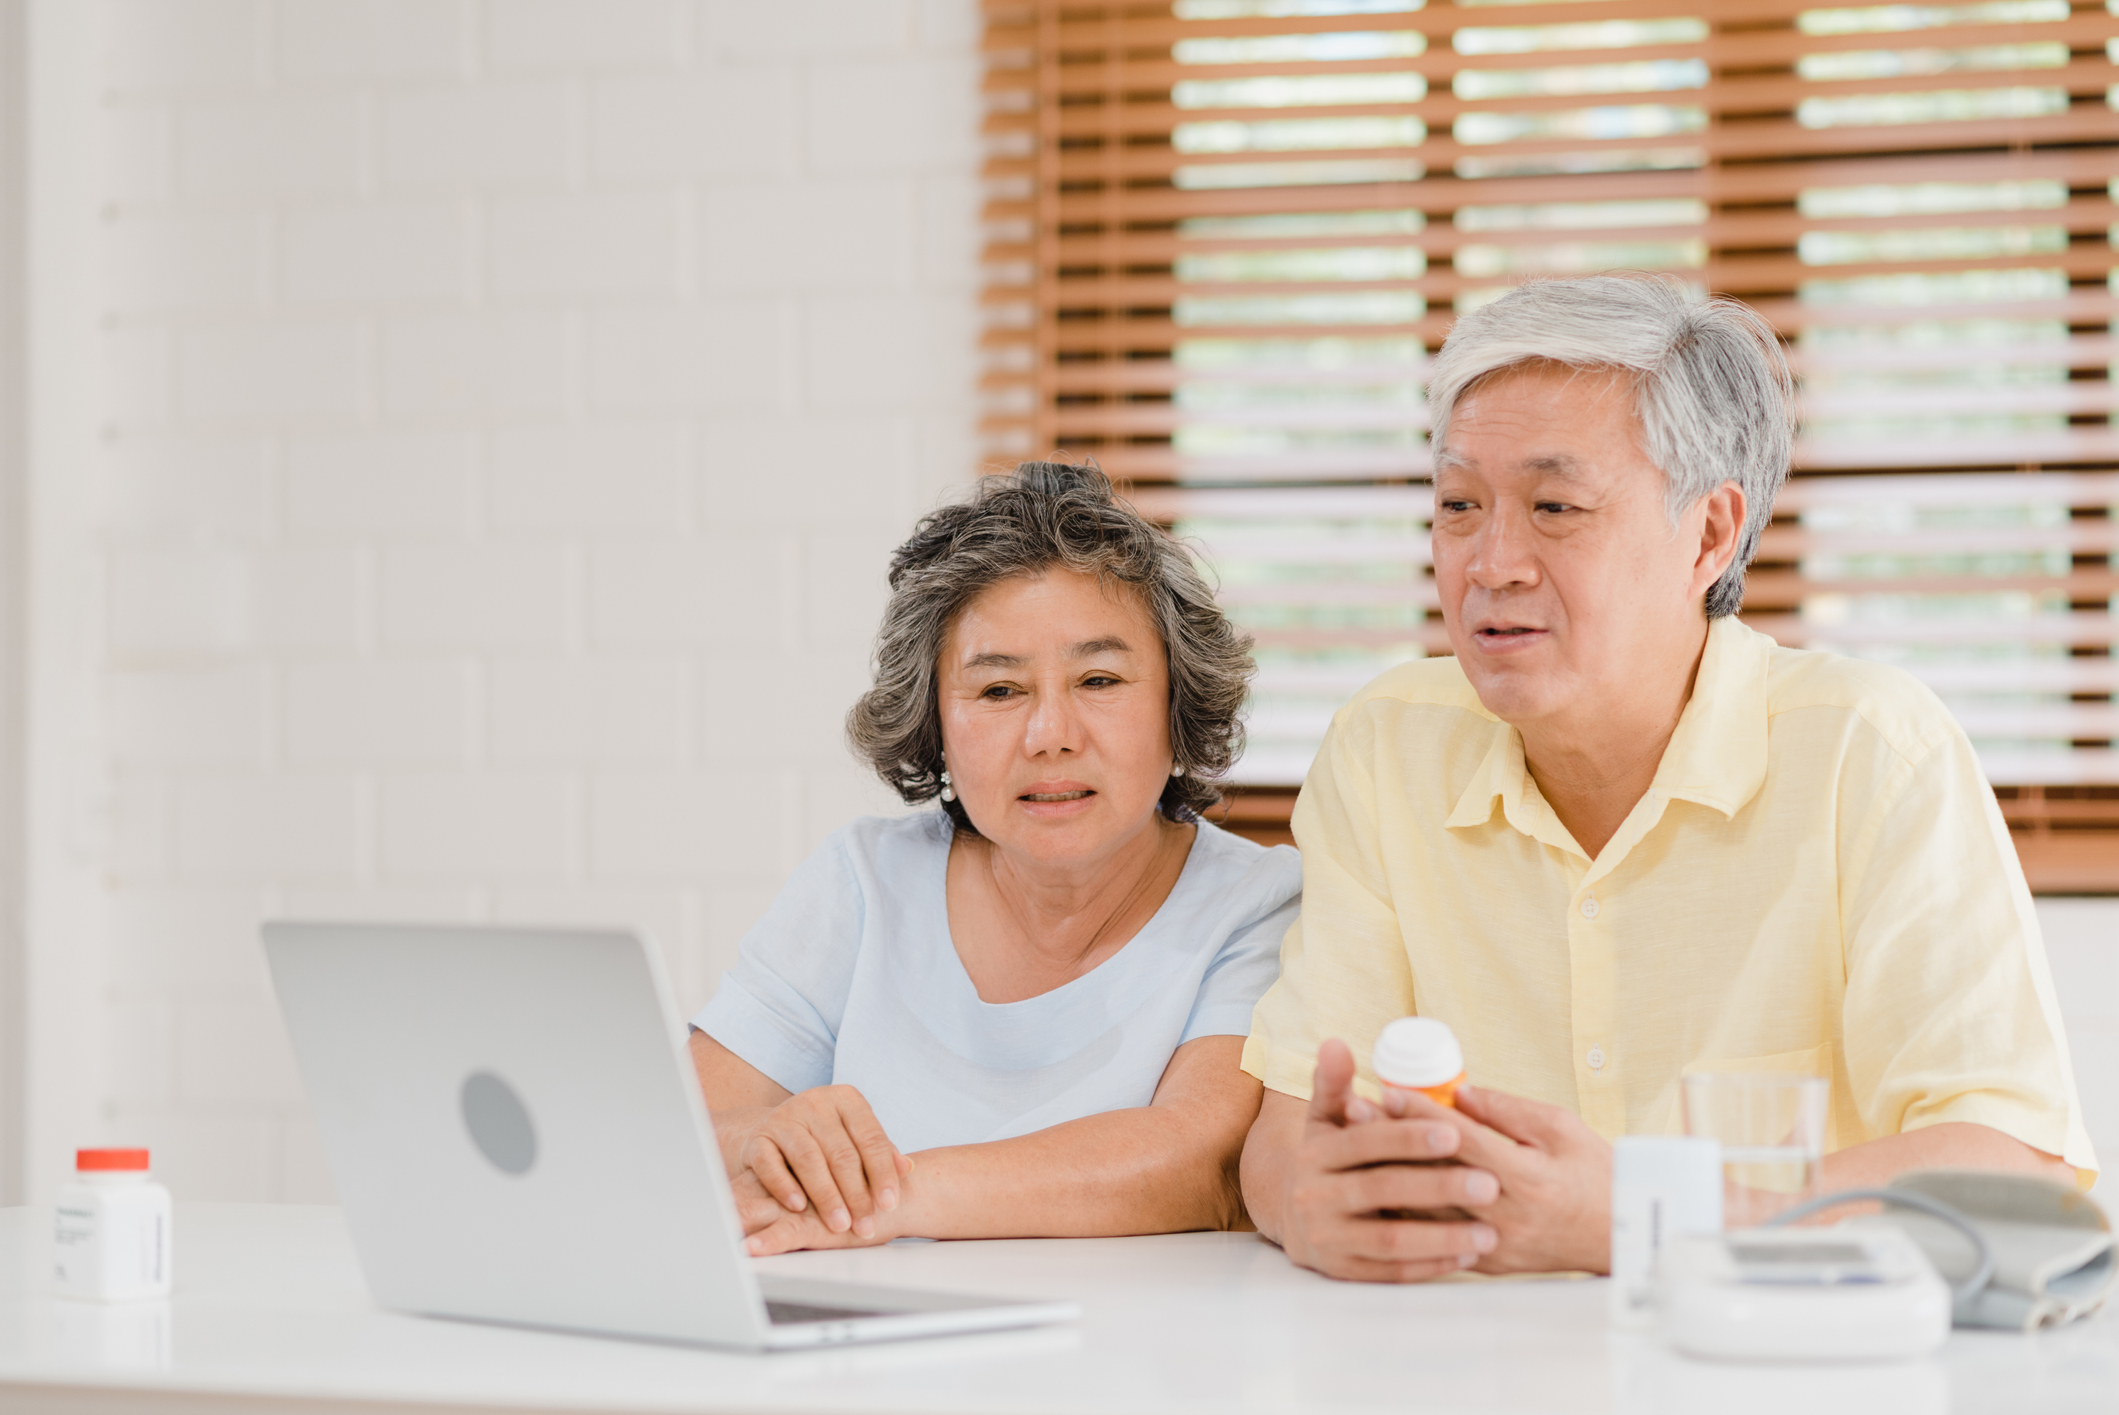 The Keys to Effective Telemedicine for Older Adults